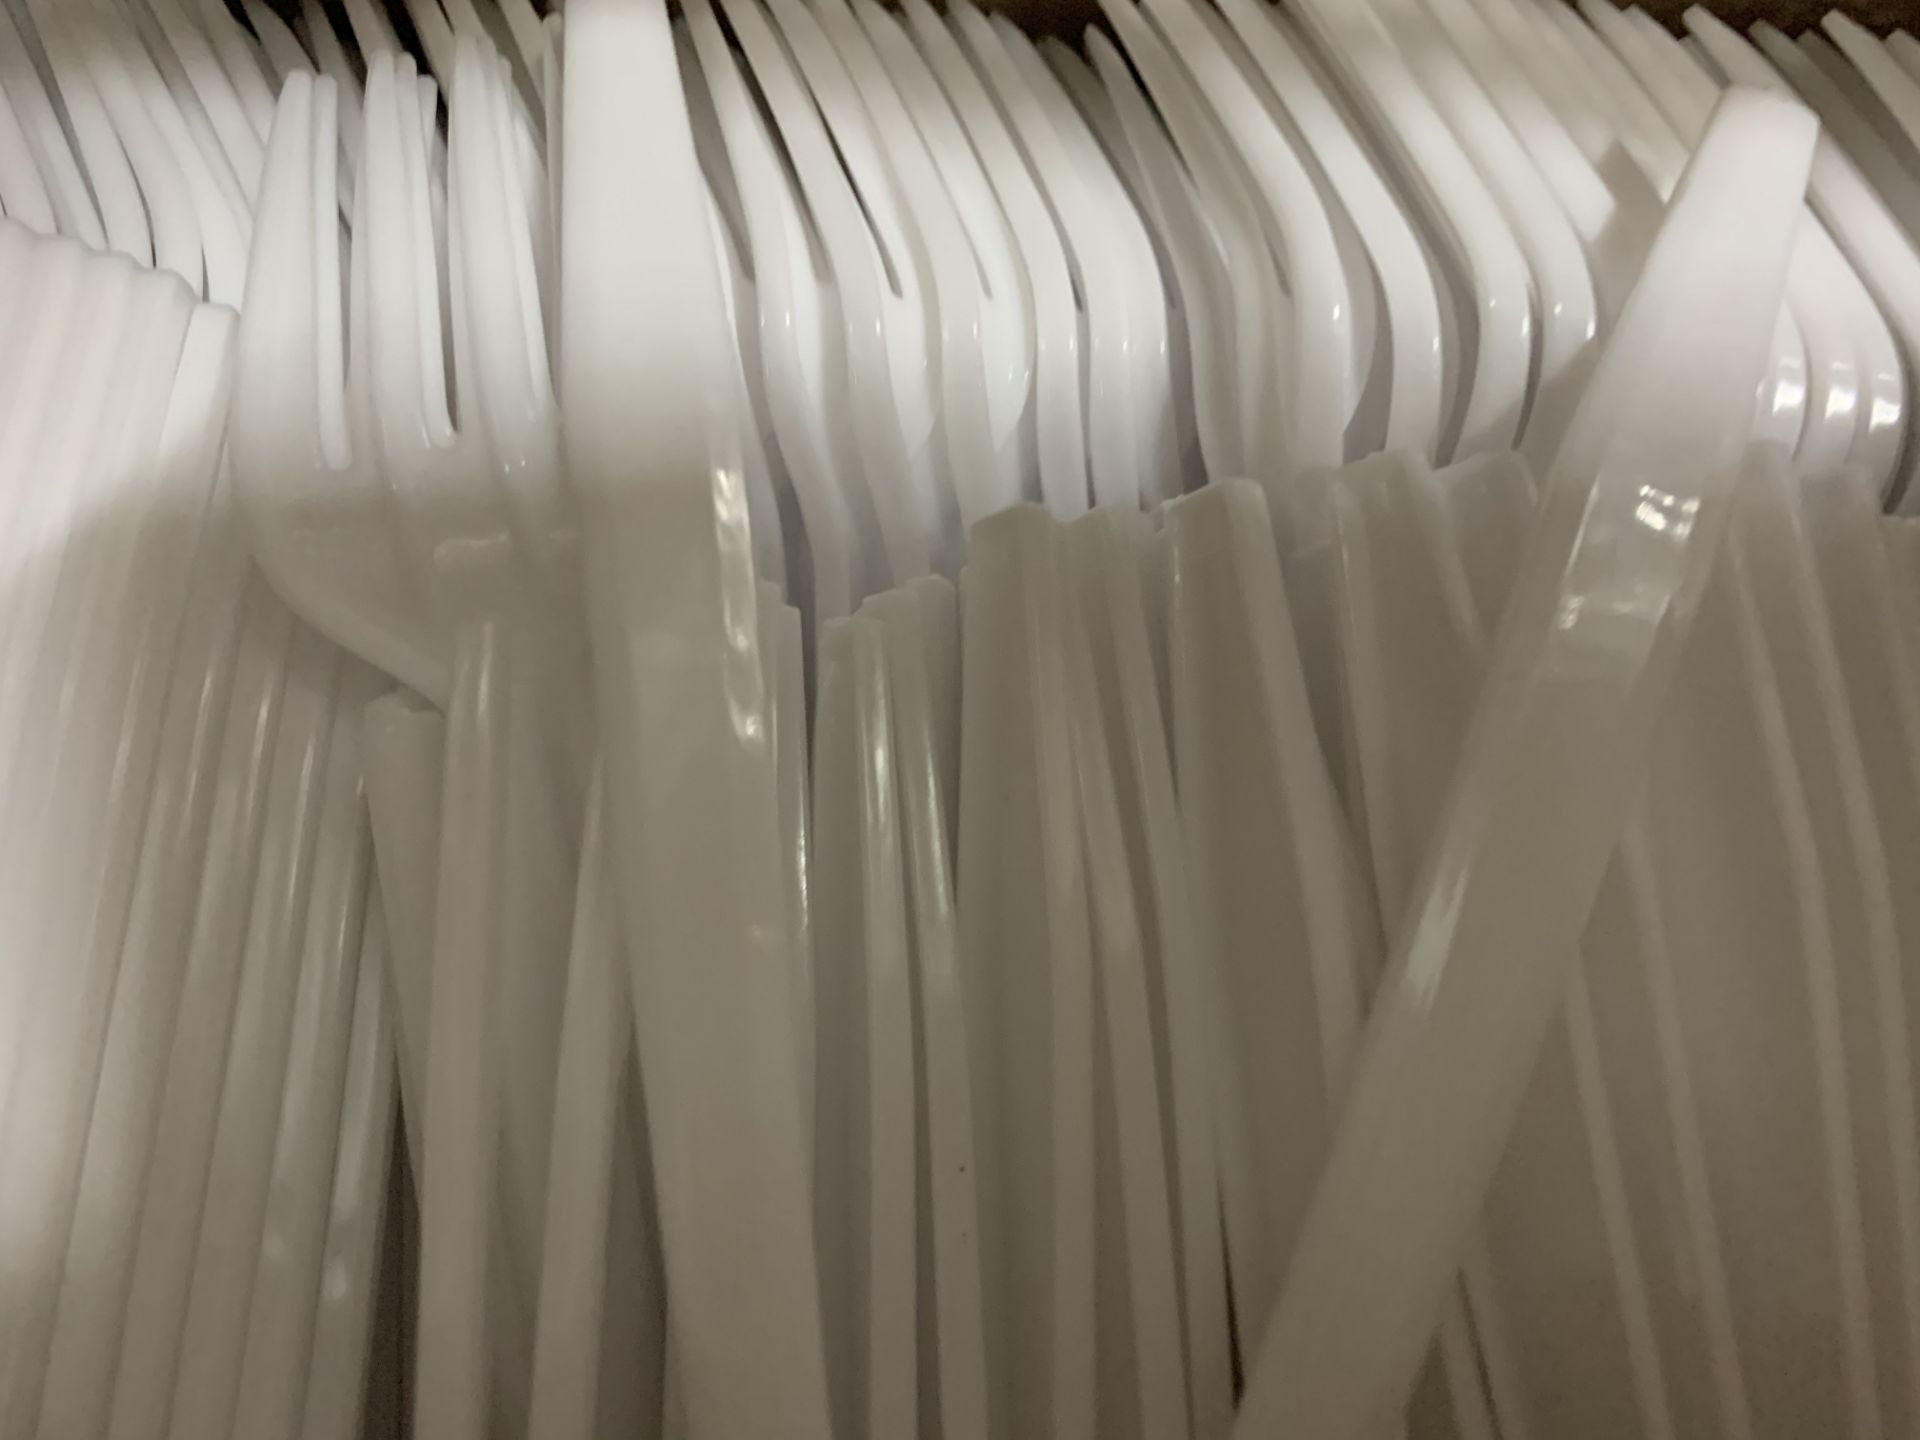 2 x Boxes of 1000 Mini Forks by 888 Gastro Disposables | DSP3 - Bild 4 aus 5